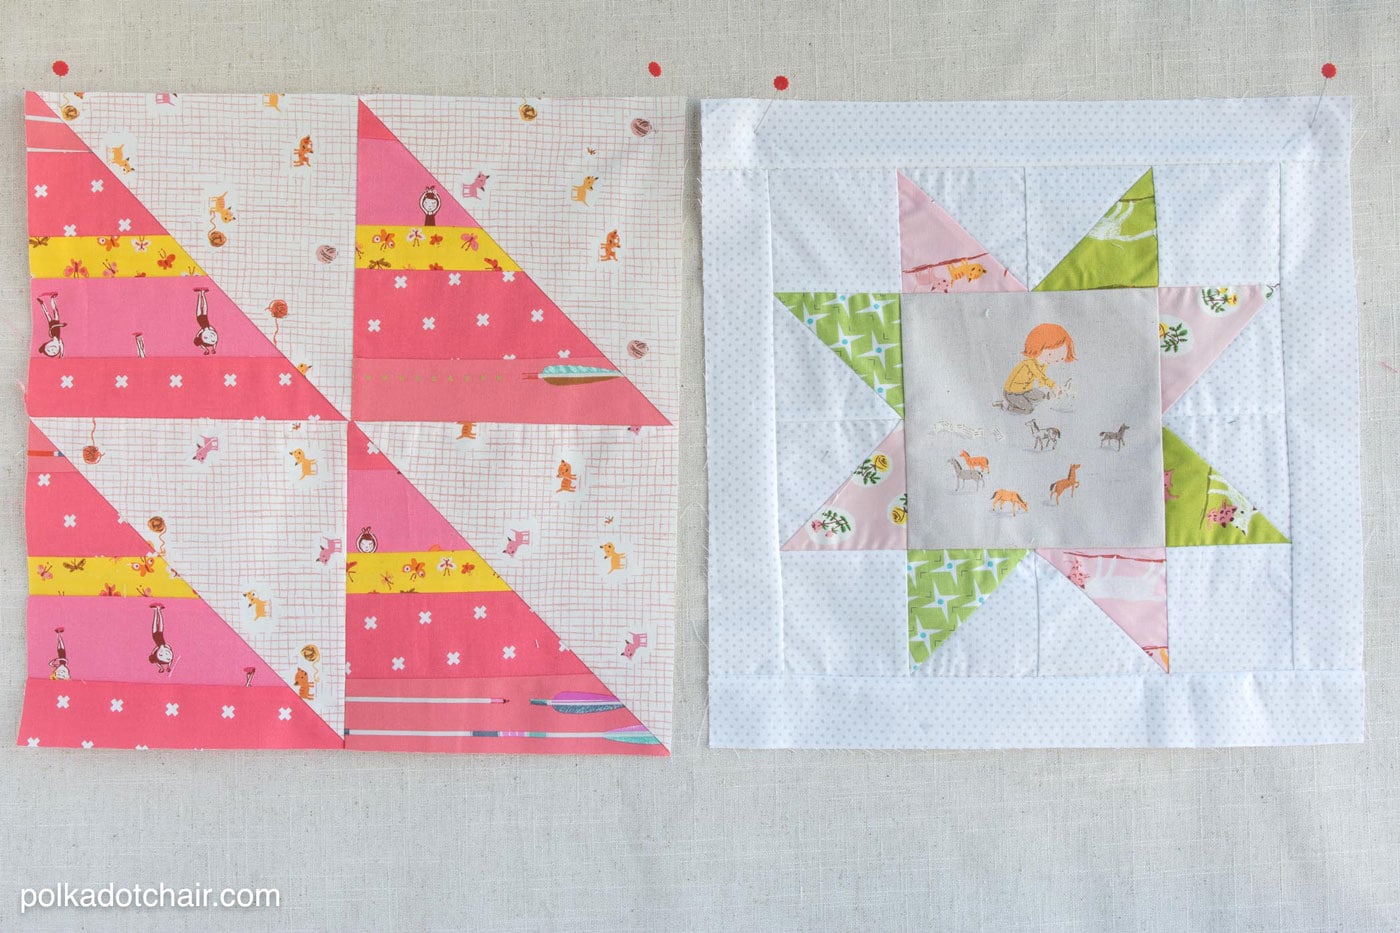 Instructions for the December Block of the Month; a String Half Square Triangle Quilt block on polkadotchair.com - it's free! - I'm totally doing this..